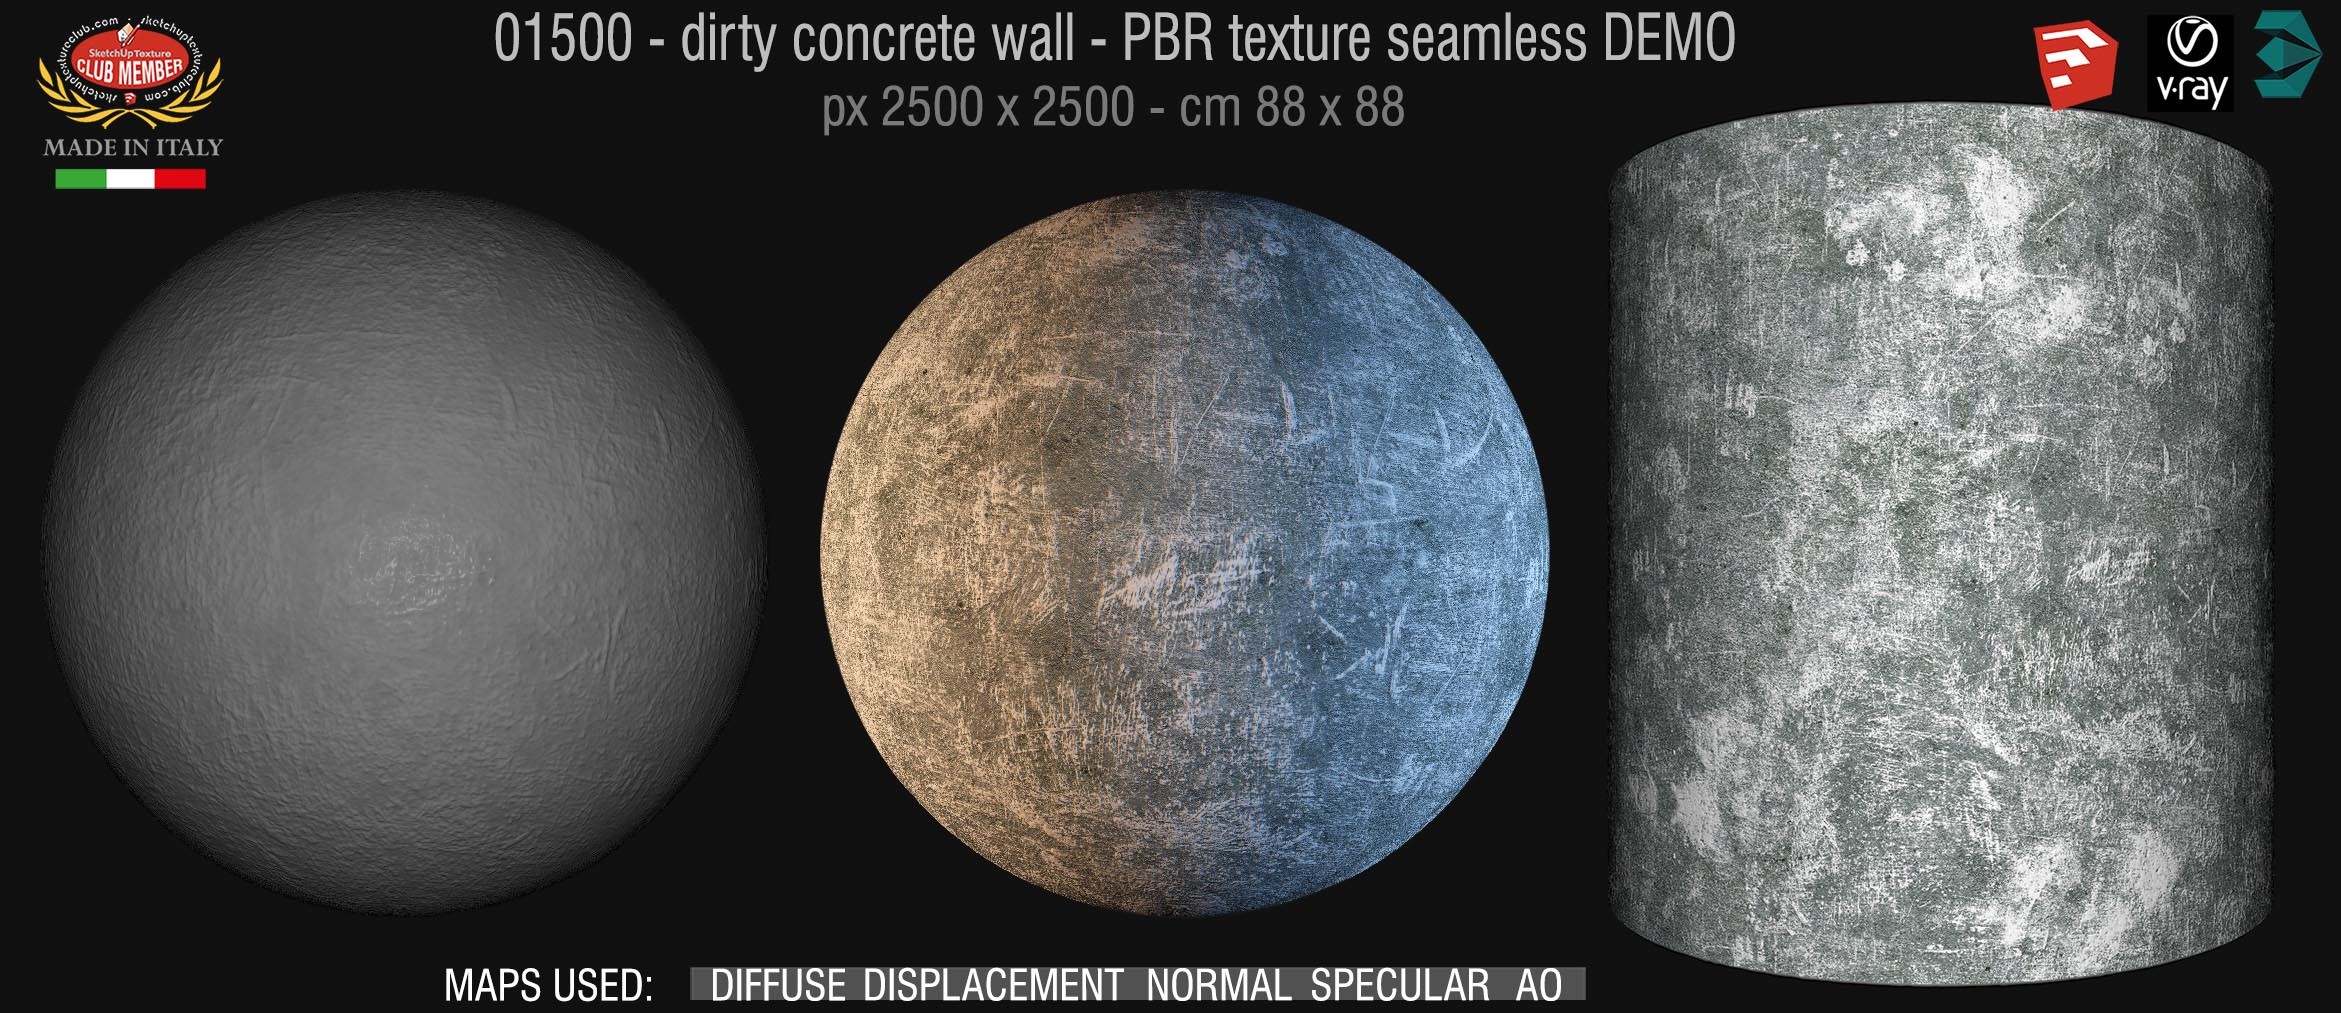 01500 Concrete bare dirty wall PBR texture seamless DEMO